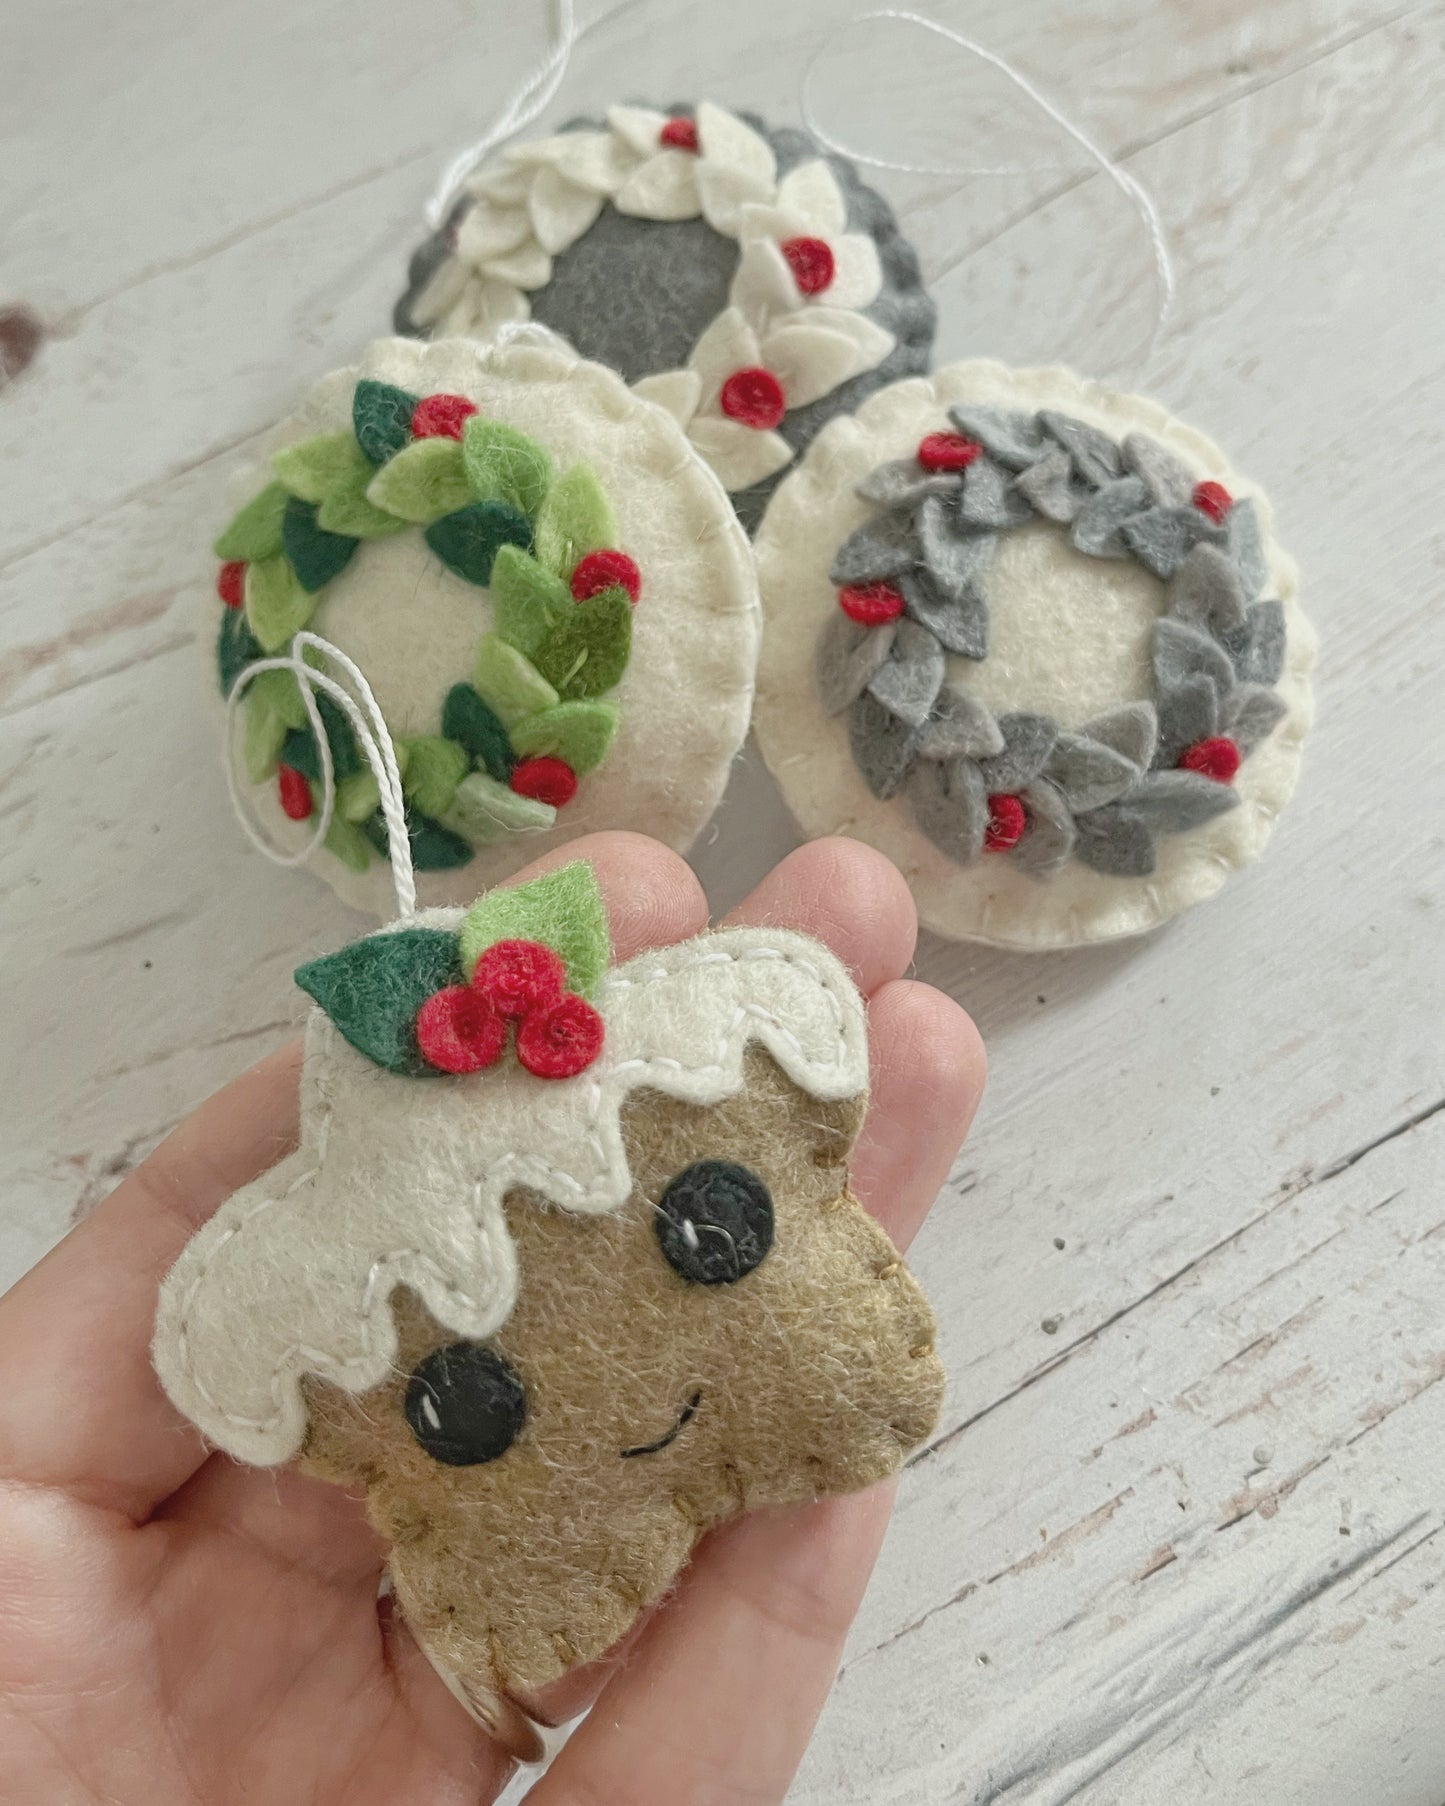 Gingerbread cookie ornament with leaves, smiling star heart and round face